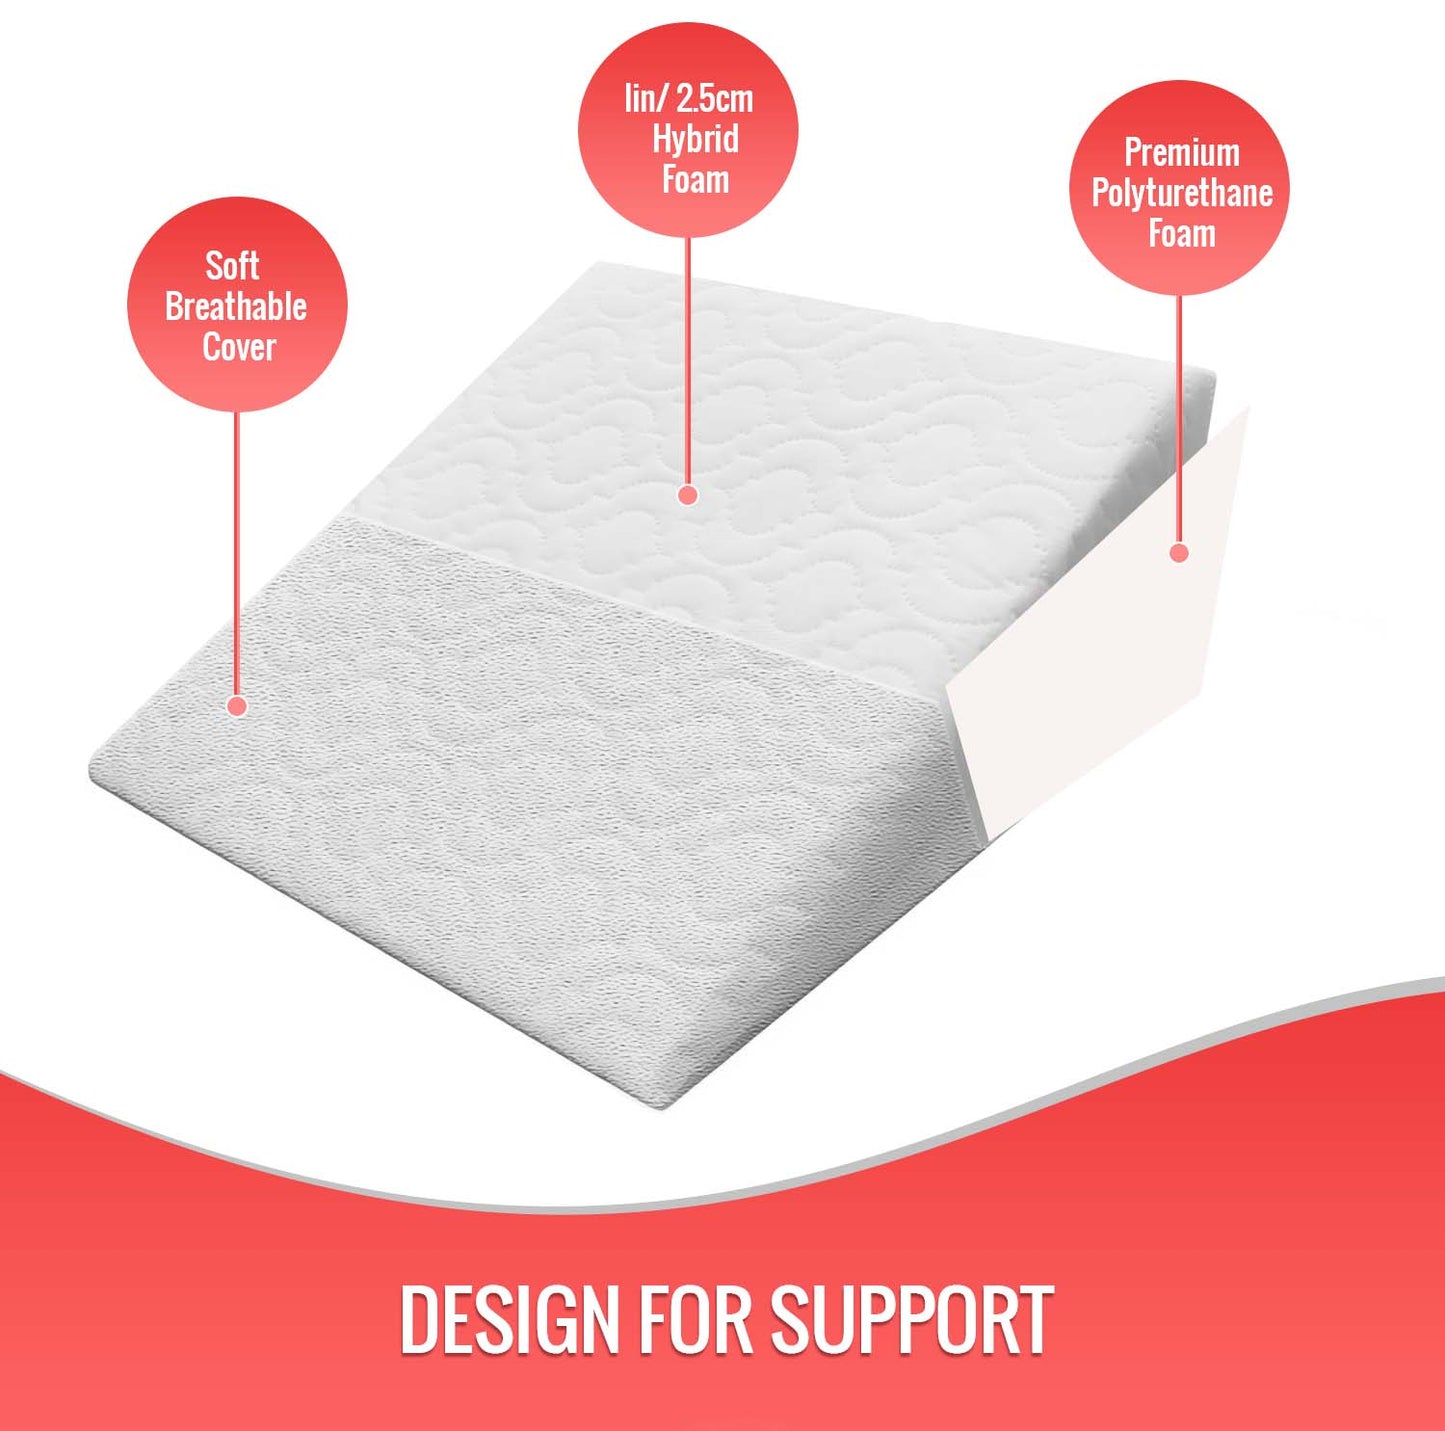 Reclining Orthopedic Hybrid Foam Wedge Pillow for Greater Comfort with Zip Cover